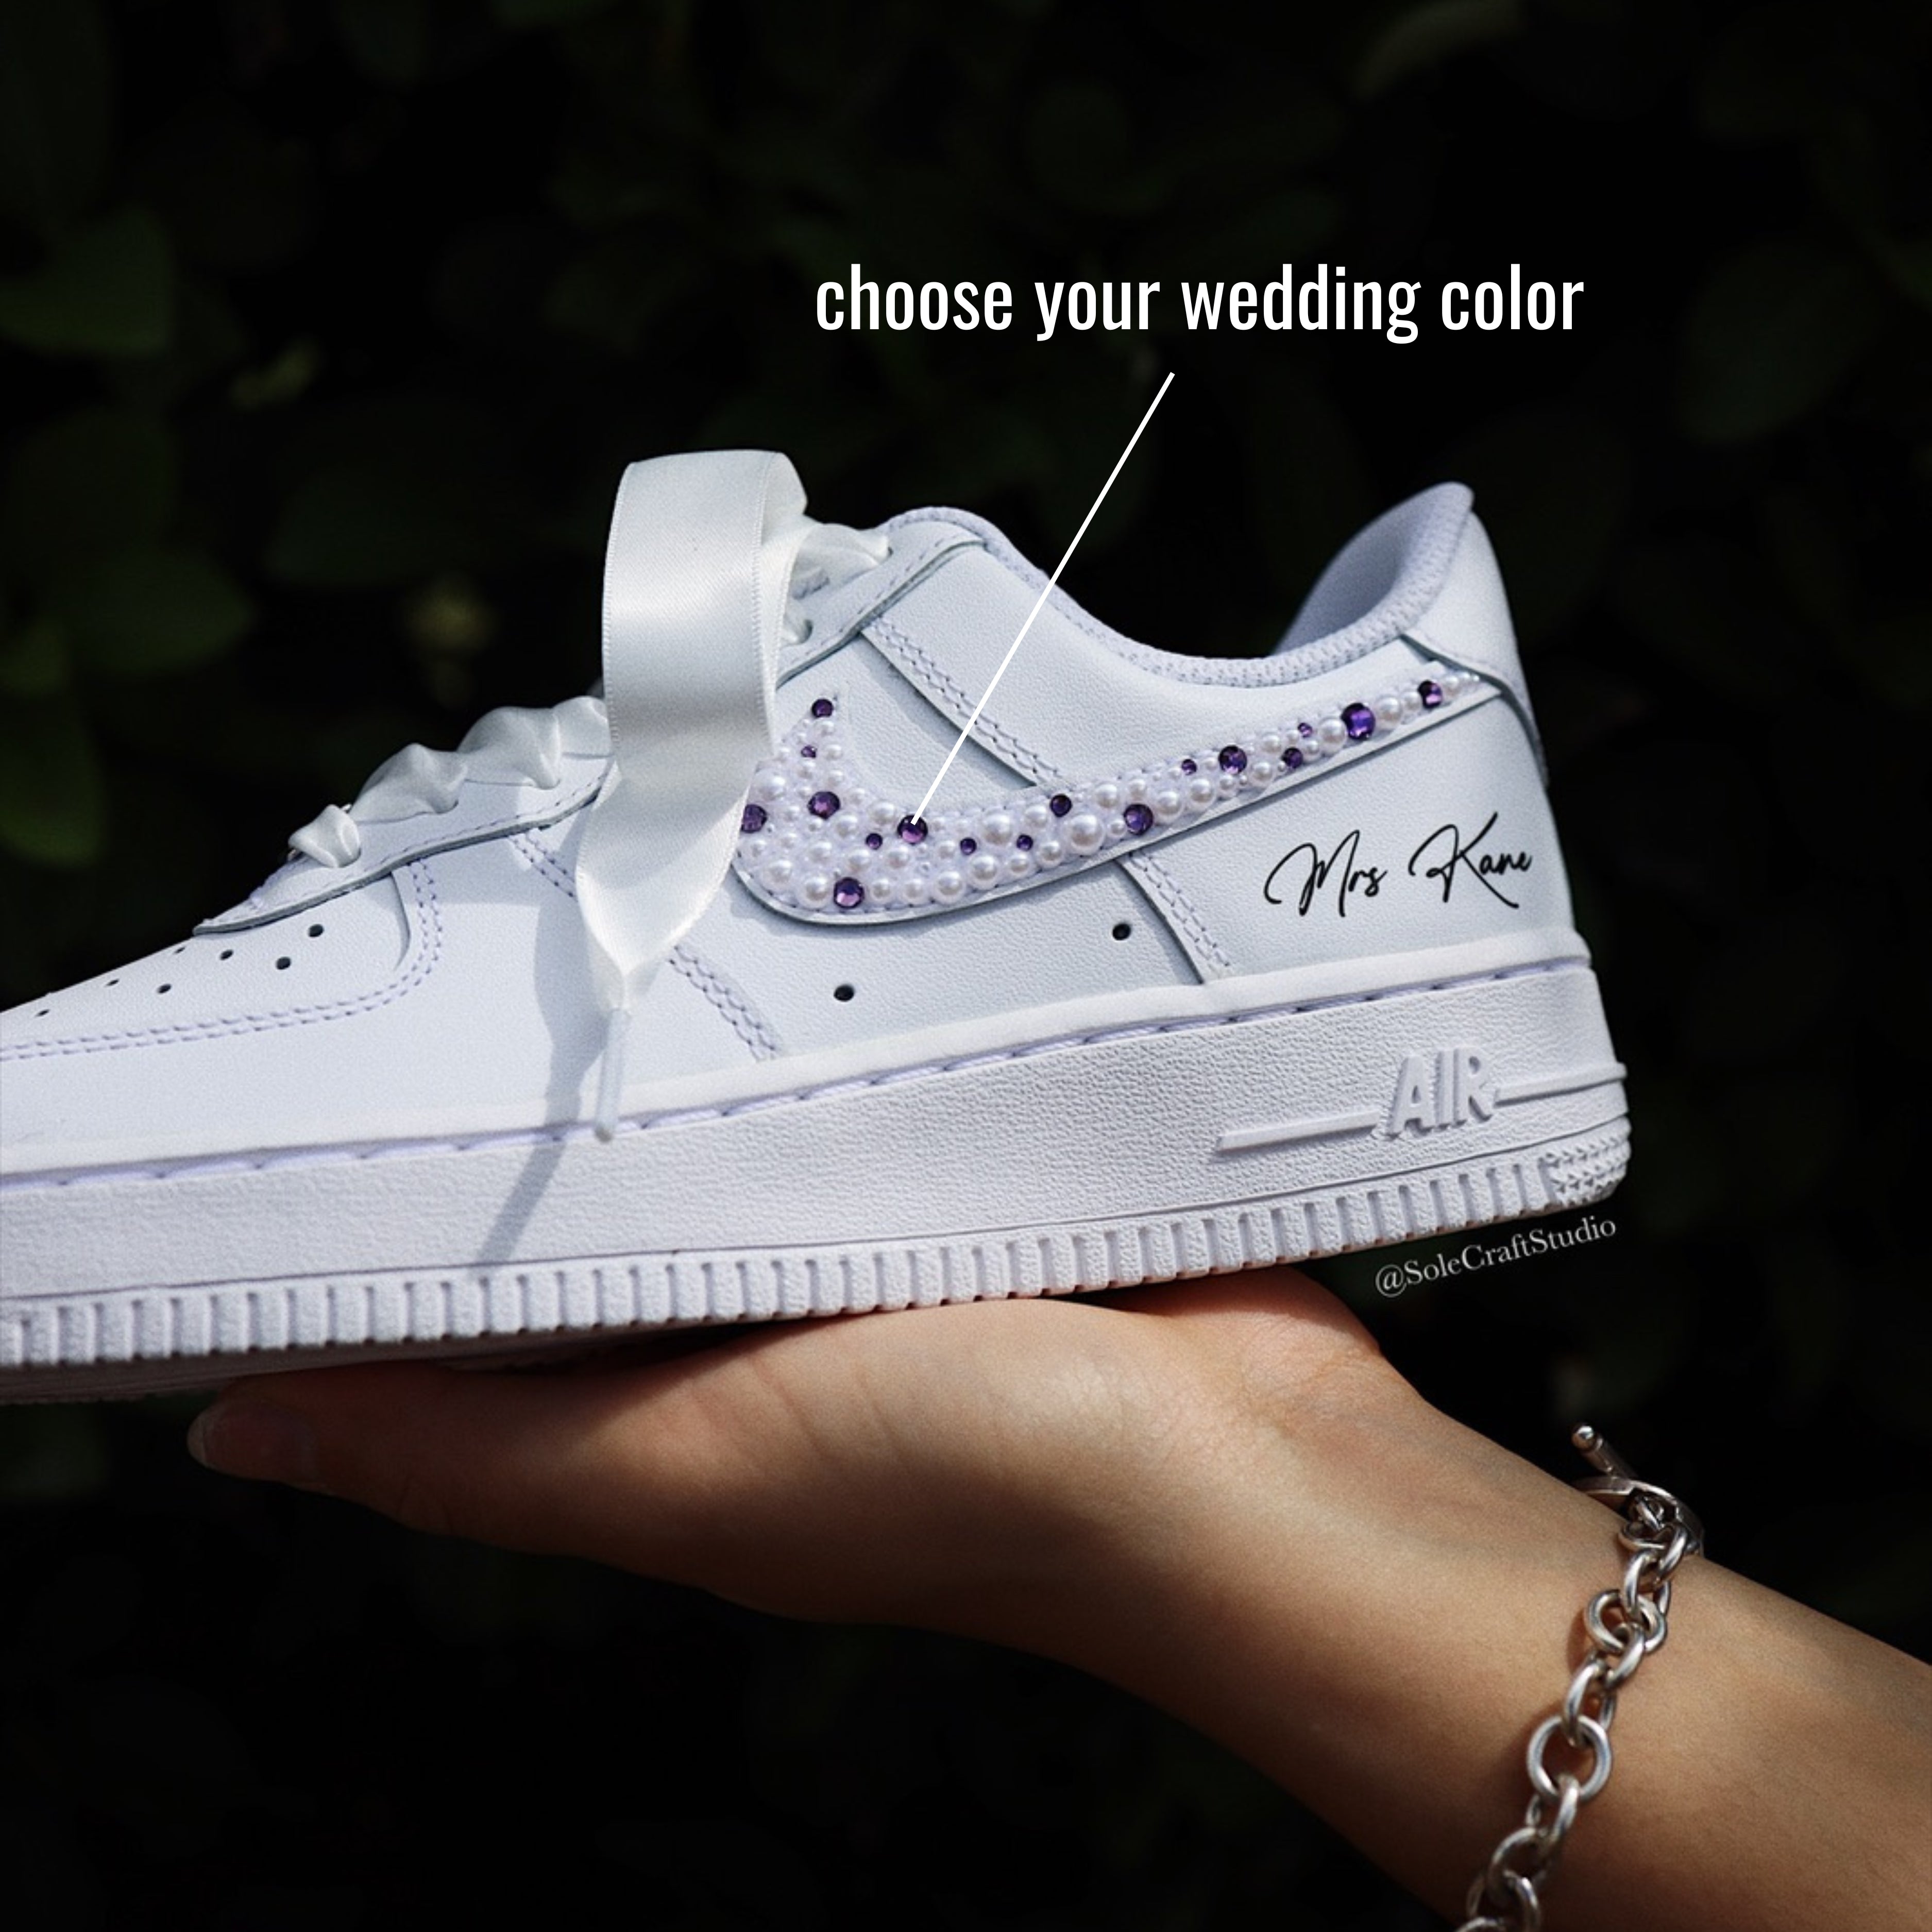 Wedding Sneakers for Bride Personalized Bridal Shoes Air Force 1 Rhinestone Crystals and White Pearl Mix Color Options, In Hand, Side View